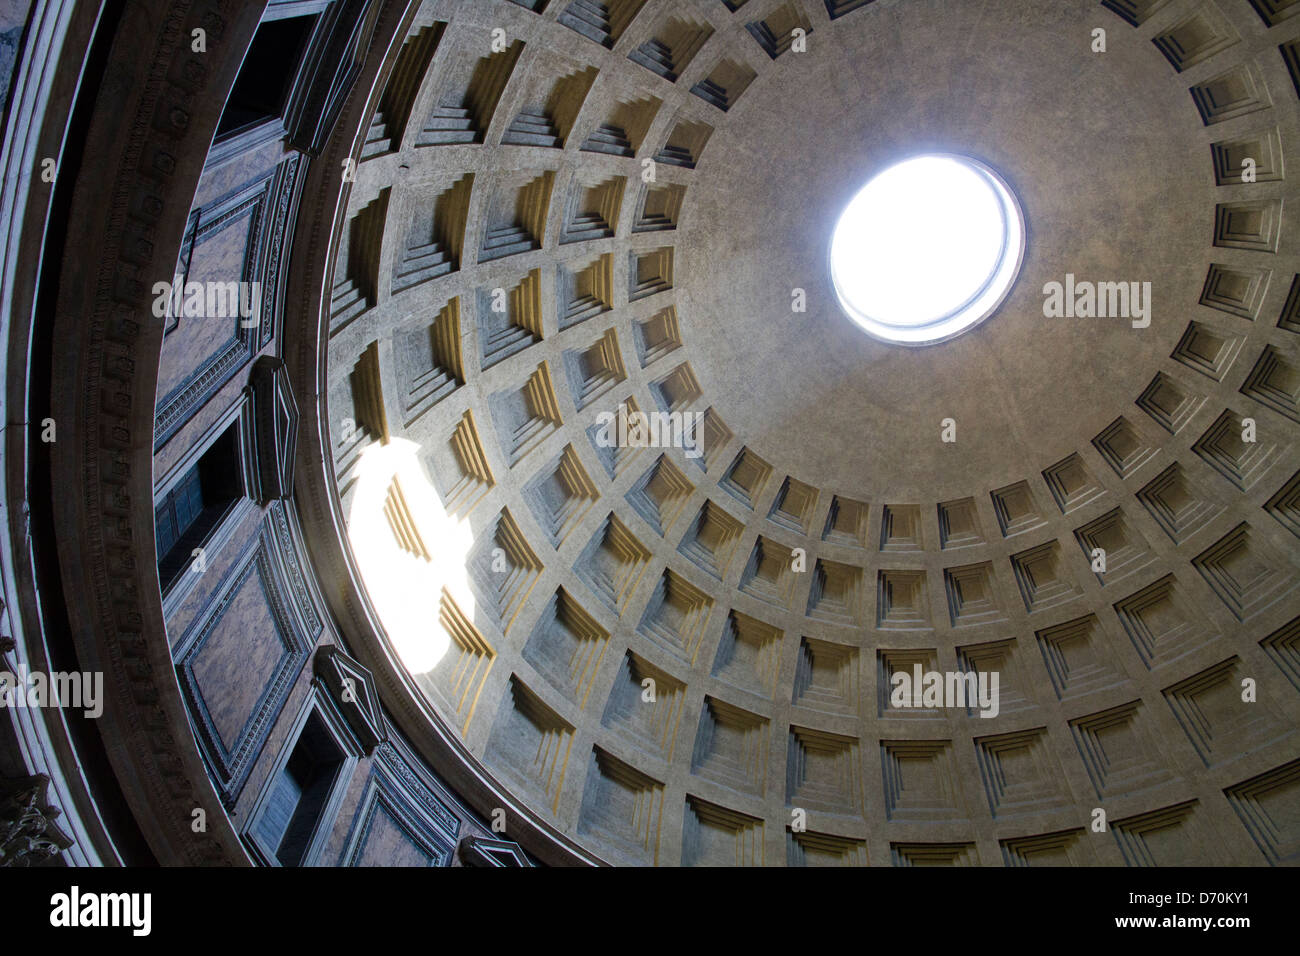 Pantheon Rome Italy historical monuments art architecture Stock Photo